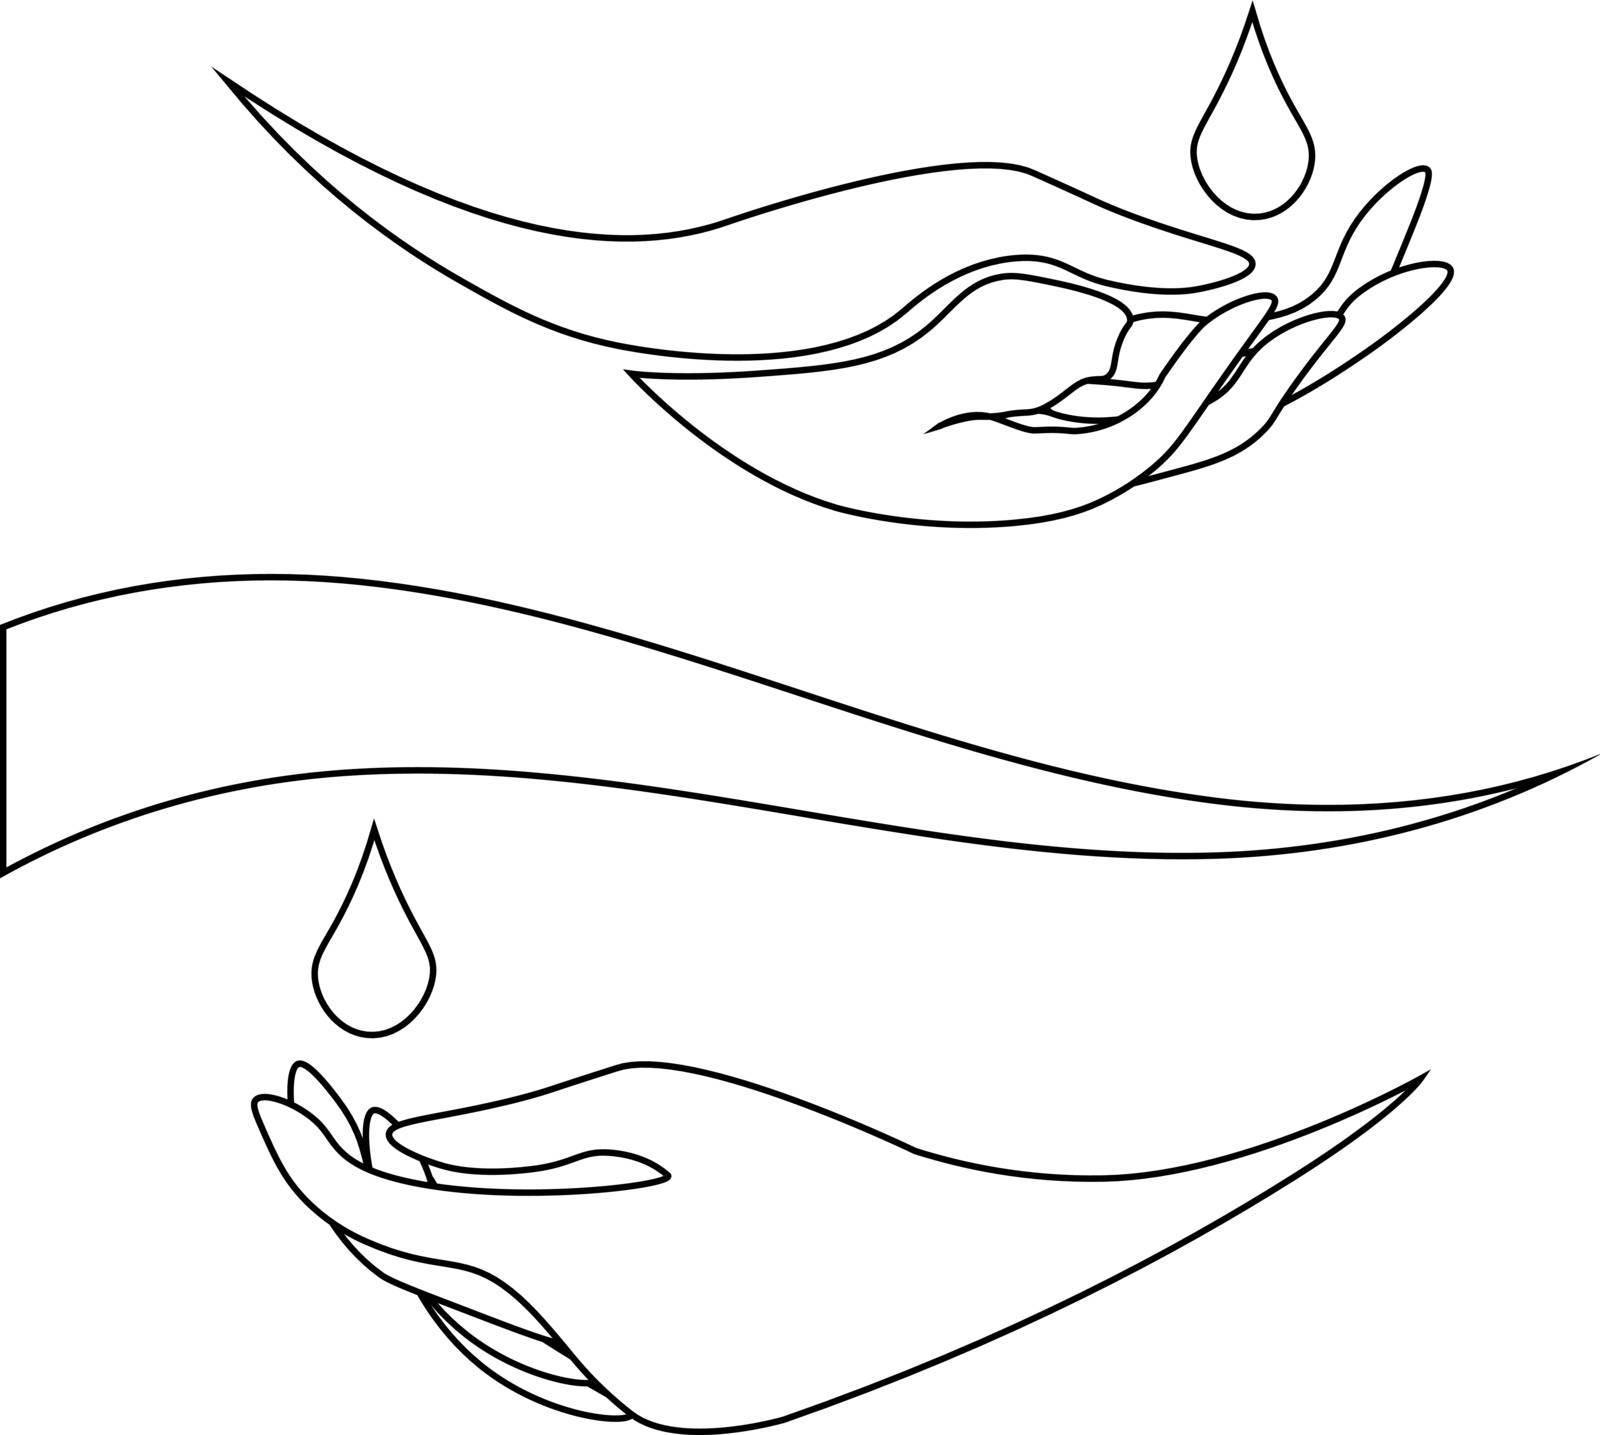 Contour illustration of two hands and water drops by paranoido